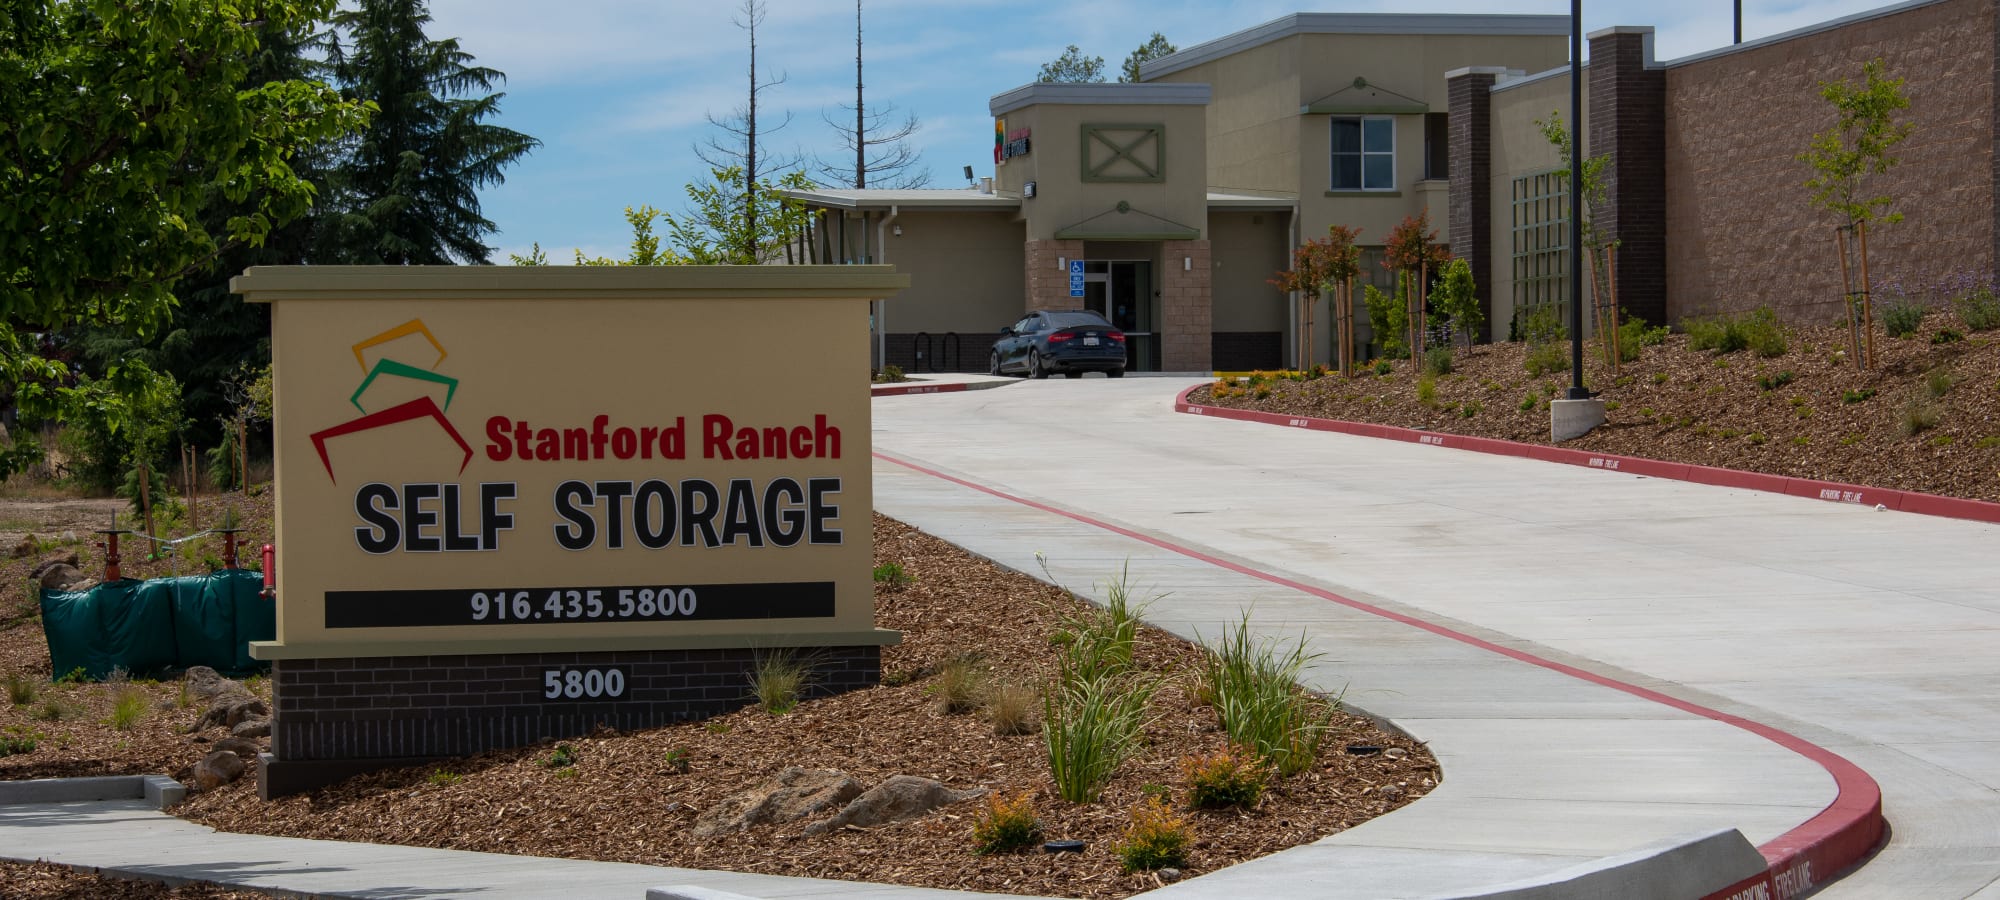 Stanford Ranch Self Storage in Rocklin, California - Home of the 1st Year Price Guarantee!